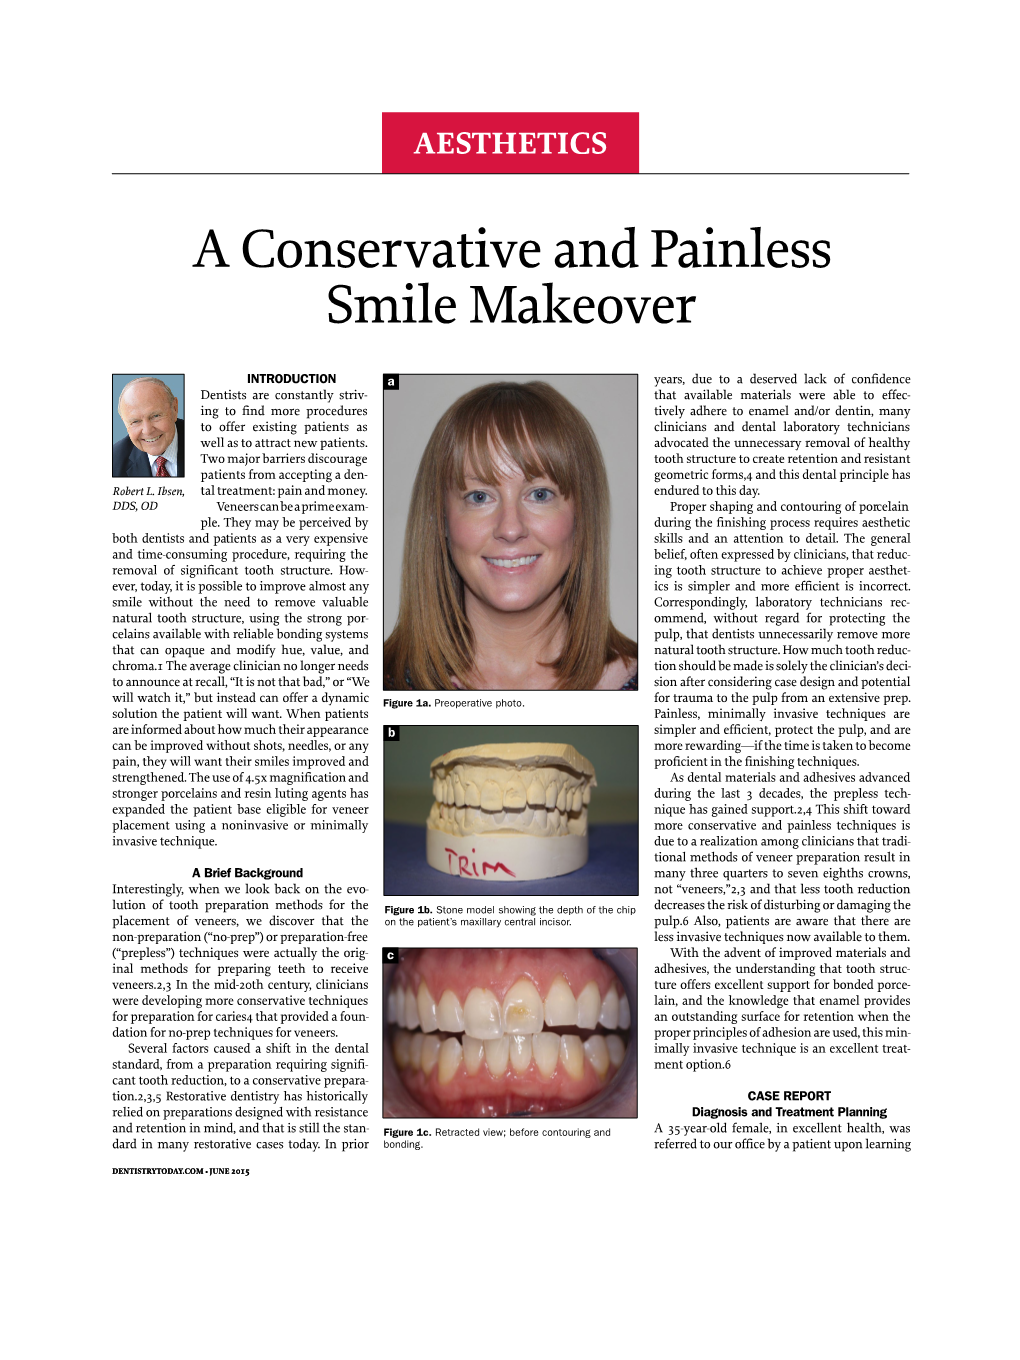 A Conservative and Painless Smile Makeover